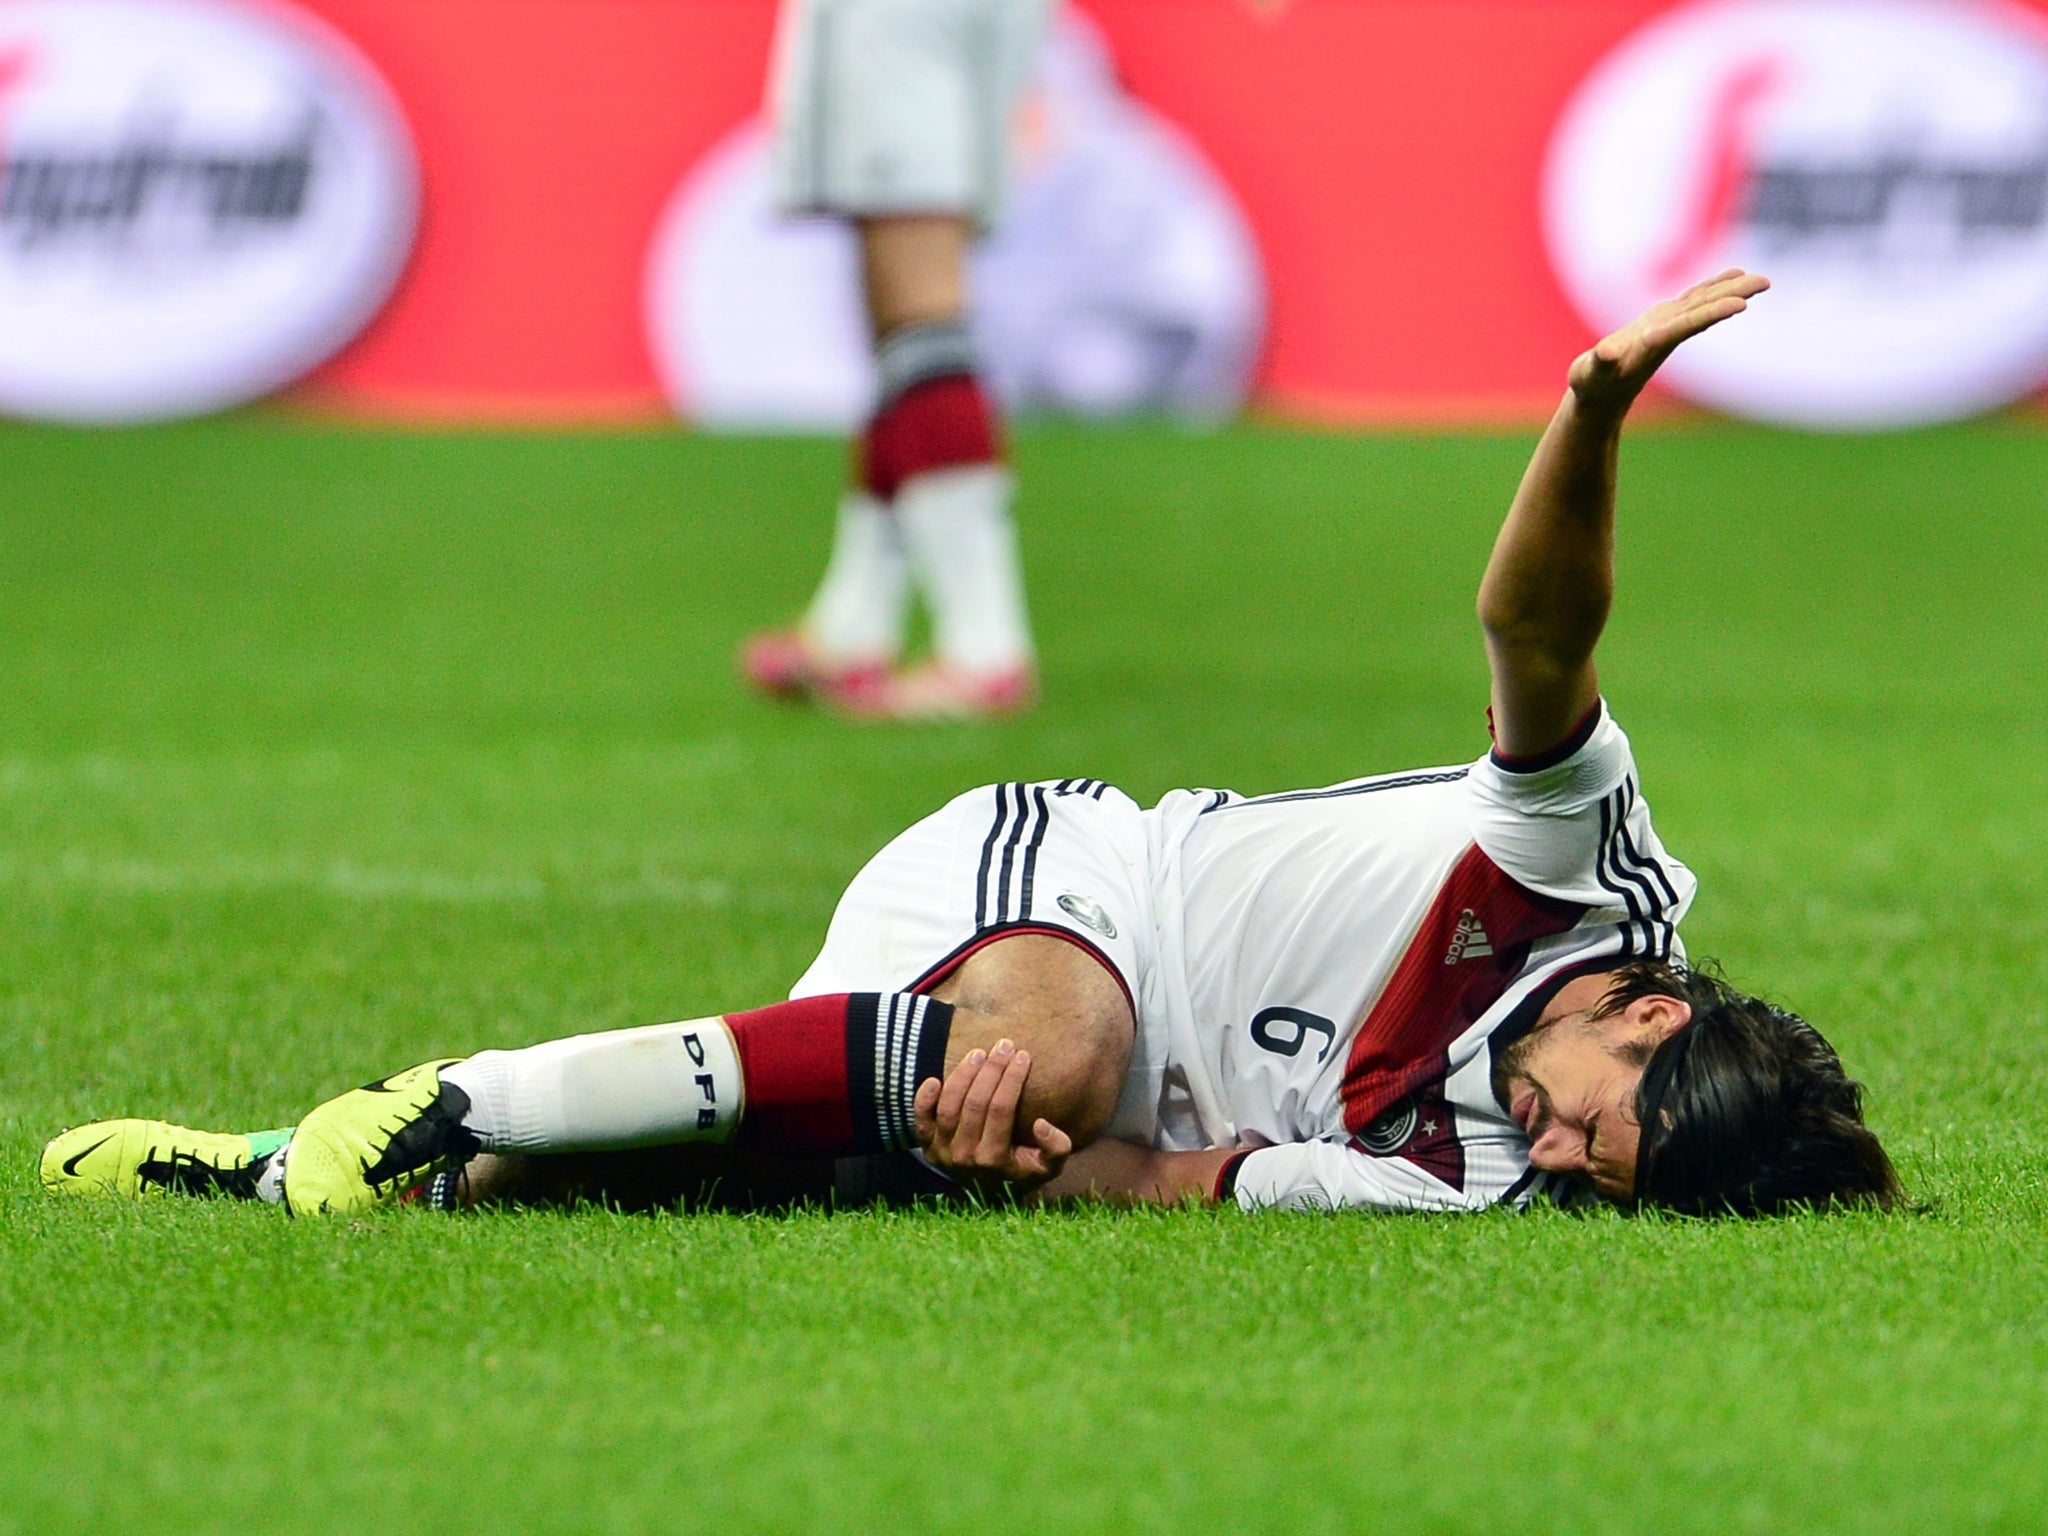 Germany midfielder Sami Khedira could face missing the World Cup after tearing his anterior cruciate ligament in the 1-1 draw with Italy